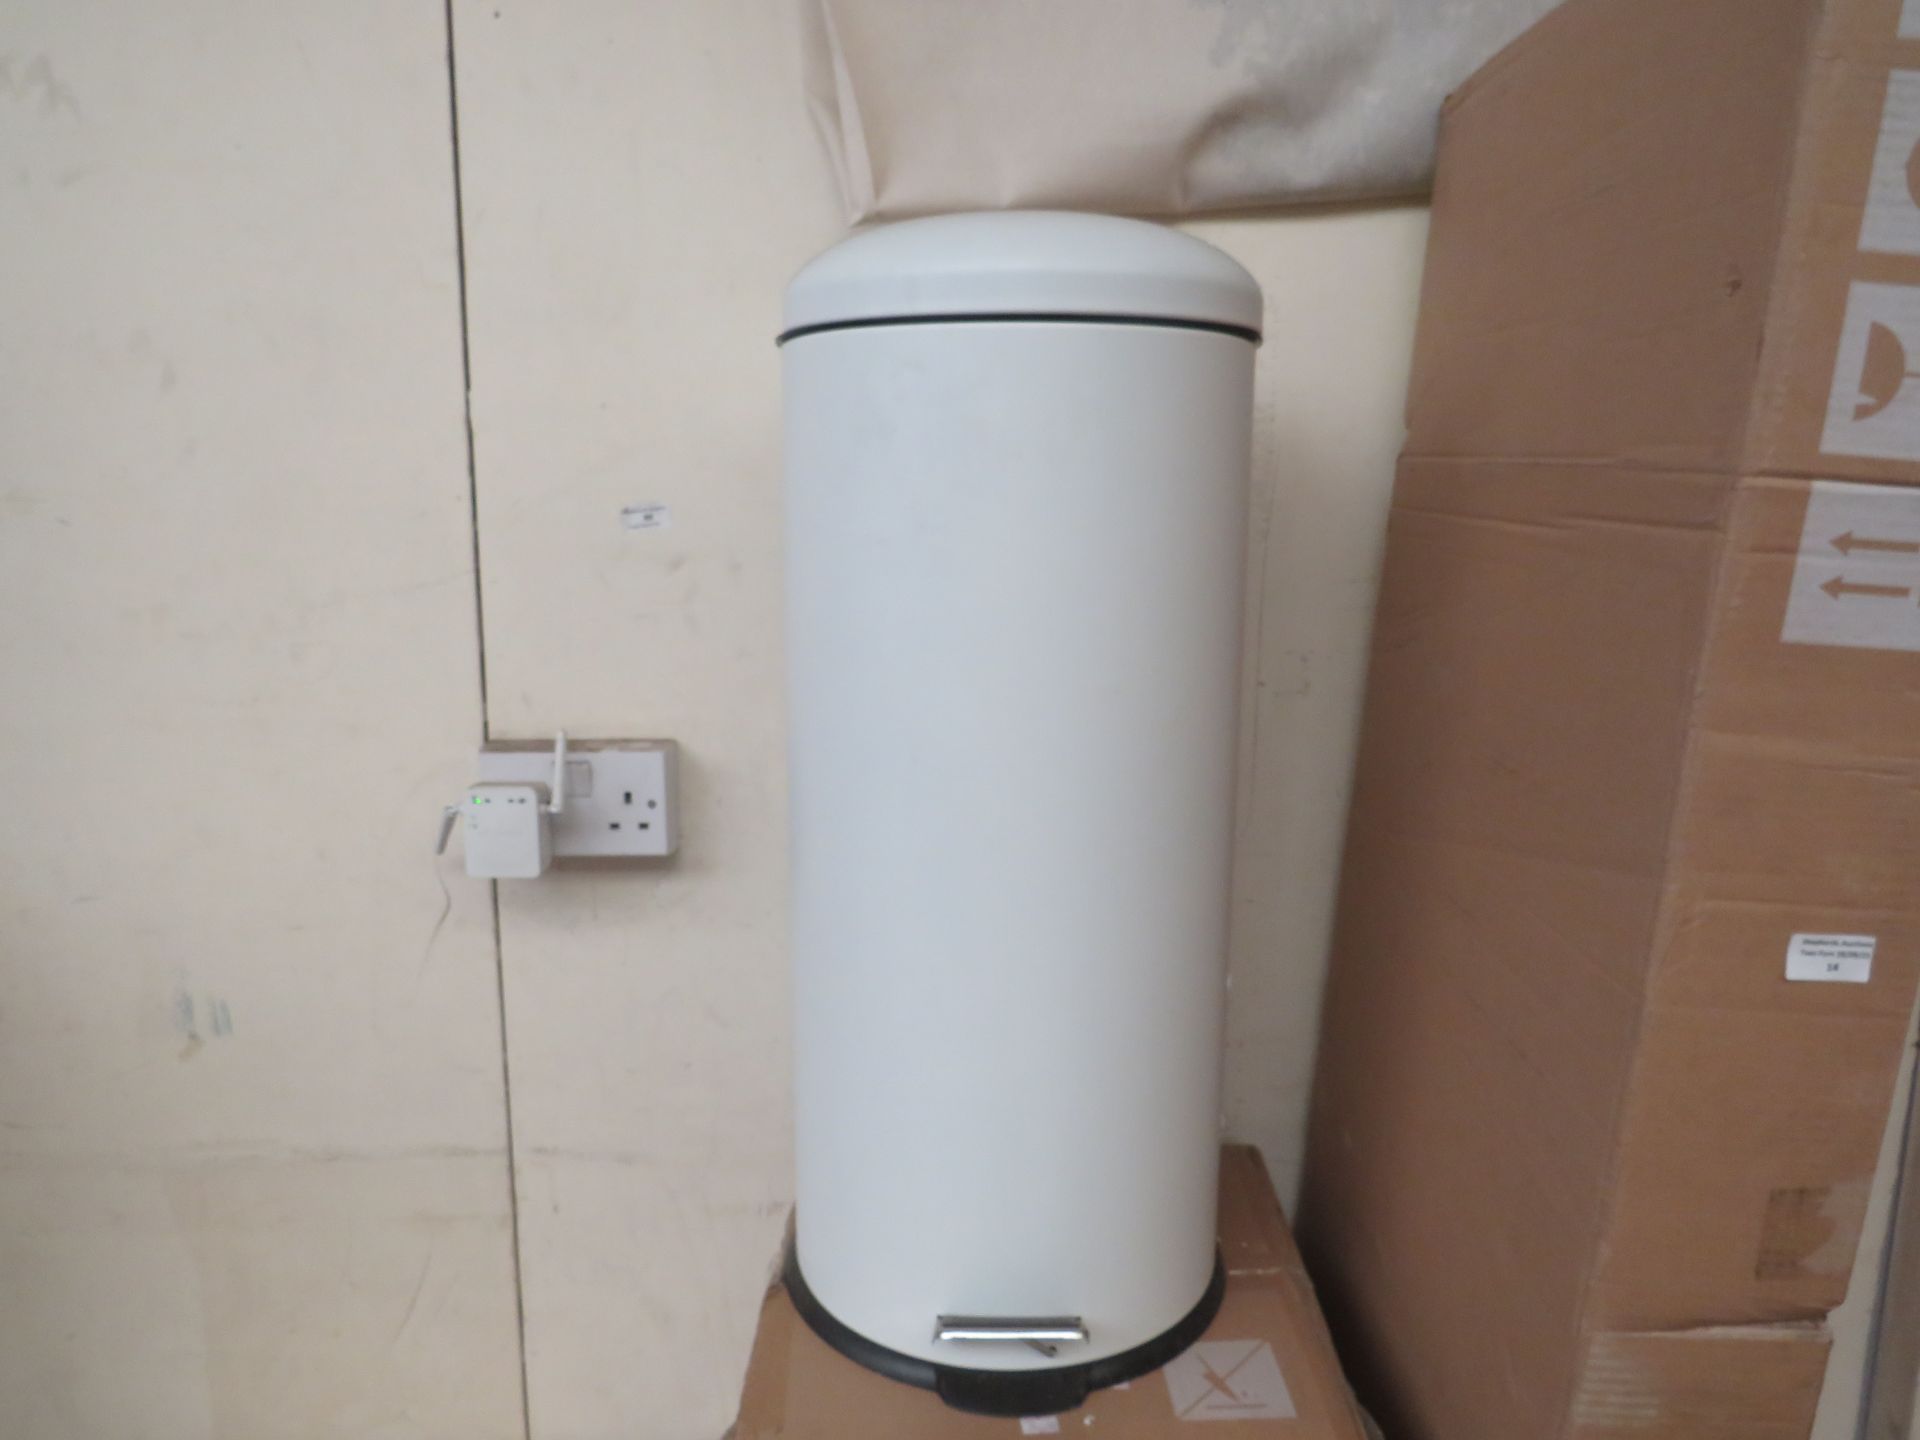 1 x Made.com Joss 30L Domed Pedal Bin White RRP £39 SKU MAD-BTAJOS003WHI-UK TOTAL RRP £39 complete